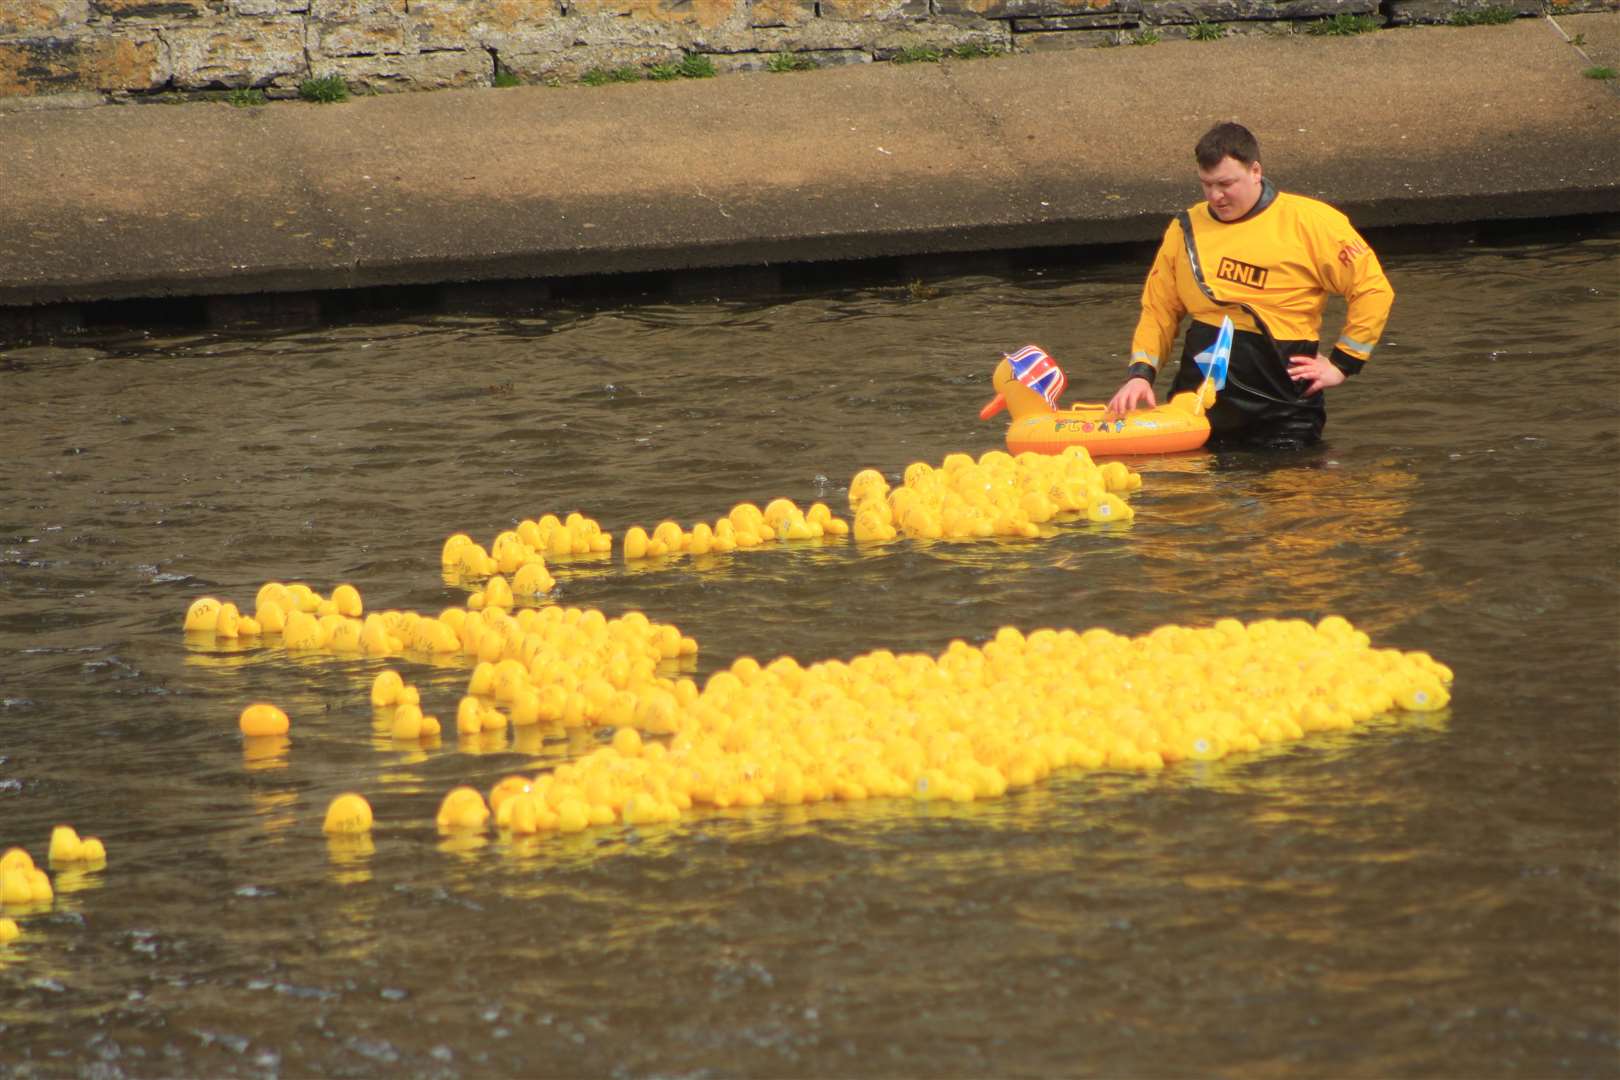 Johnny Grant made sure the ducks kept moving along. Picture: Alan Hendry